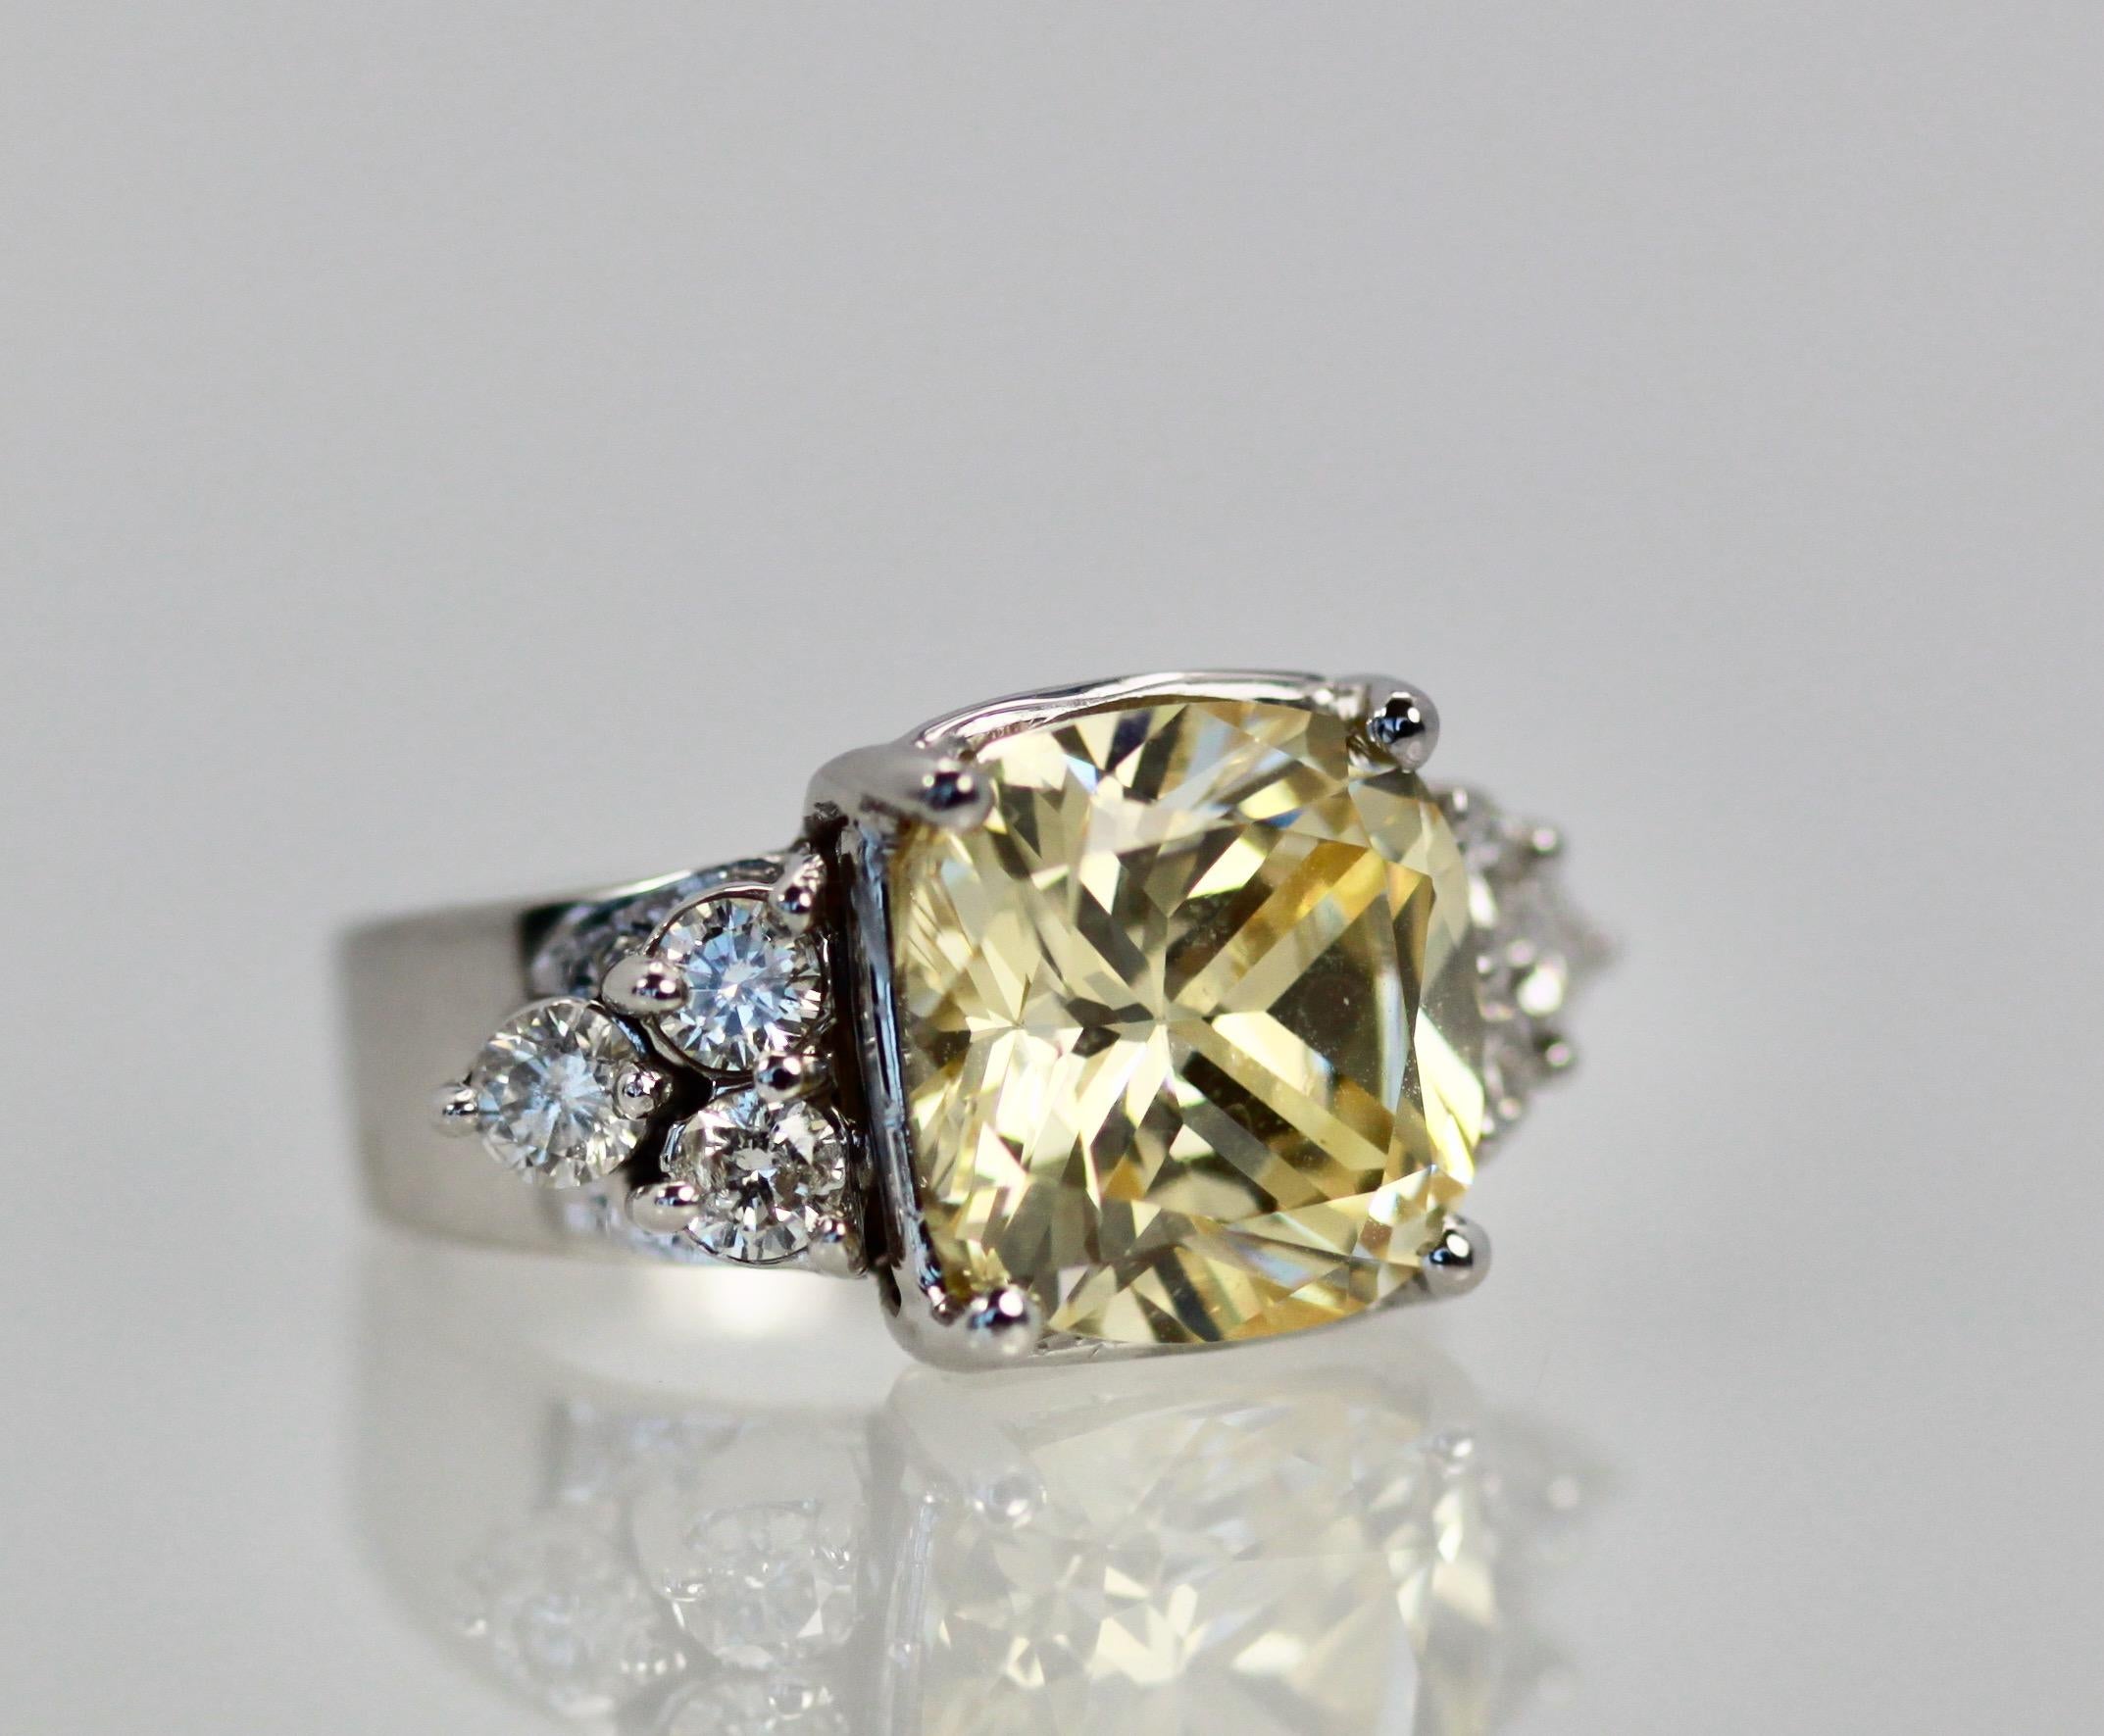 This large Yellow Sapphire is approximately 13 carats and has 3 Diamonds on each side as accents with each Diamond totally 0.15 carats each, total of 6 stones tcw 0.90 carats for a total of 13.90 carats.  This ring is made in 18k white gold and is